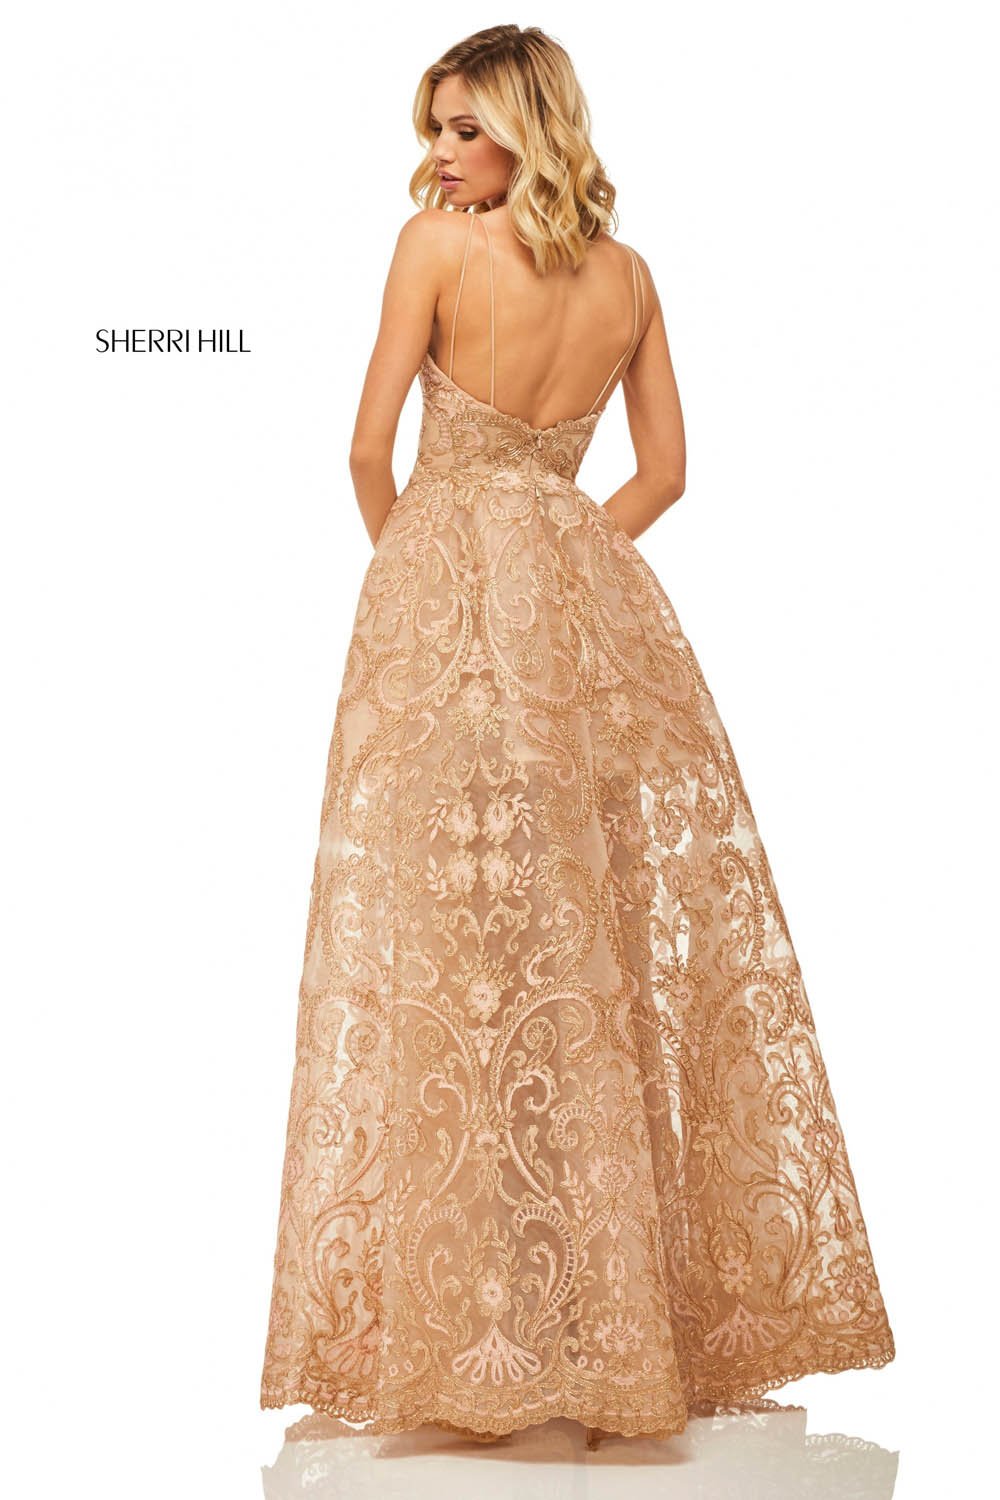 Sherri Hill 52878 dress images in these colors: Rose Gold, Gold.